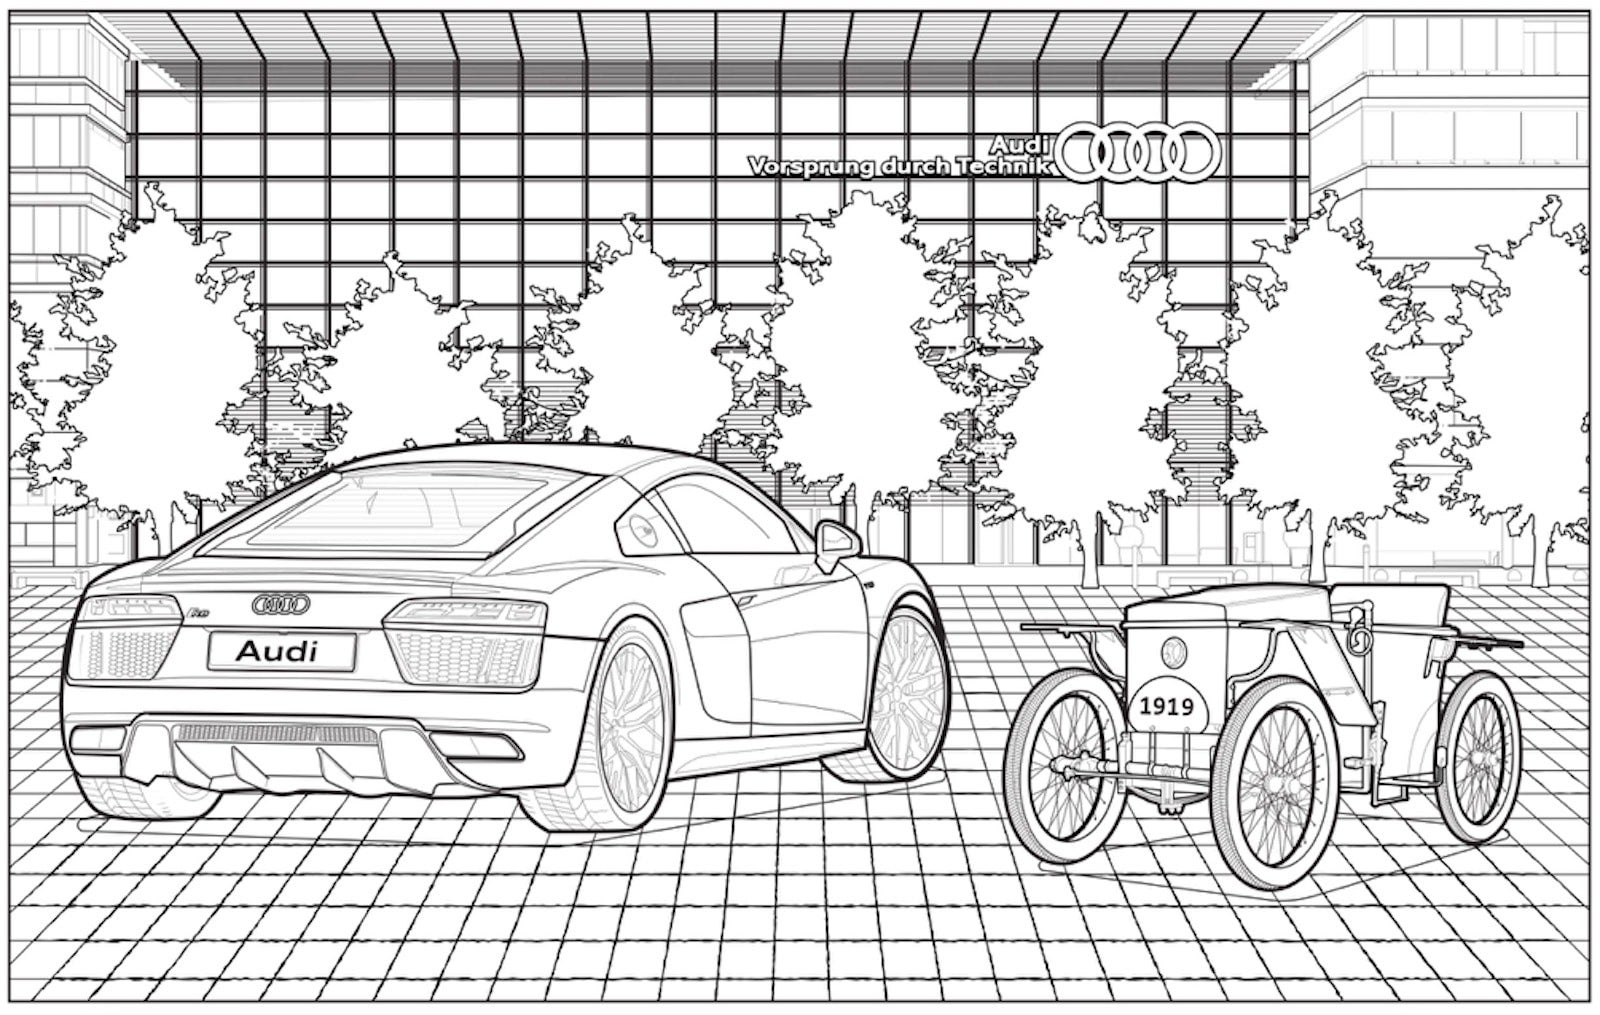 Audis free coloring book helps pass time during shelter in place